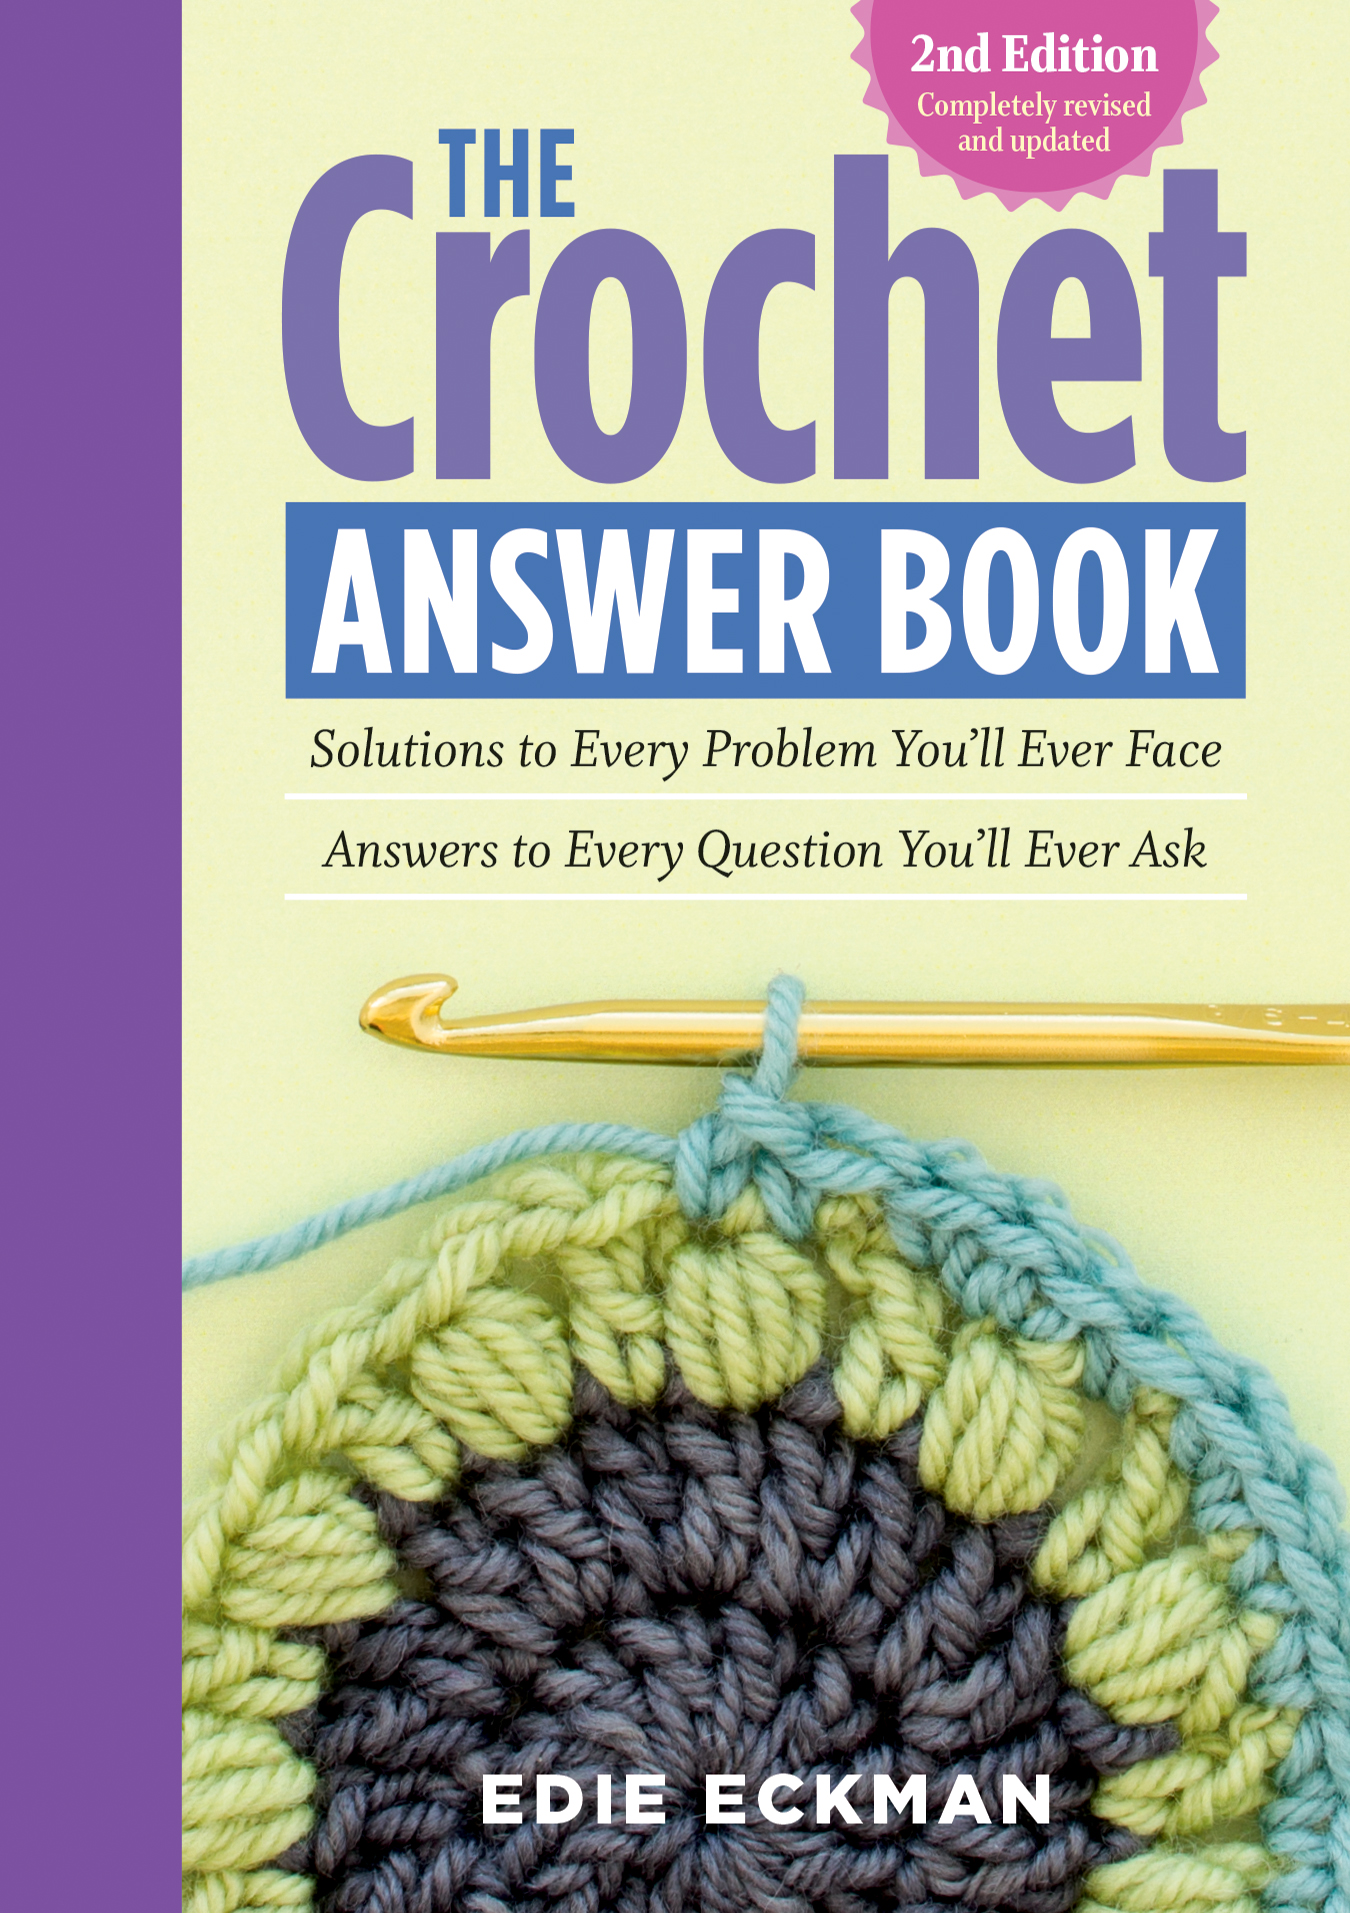 The Crochet Answer Book, 2nd Edition - Storey Publishing